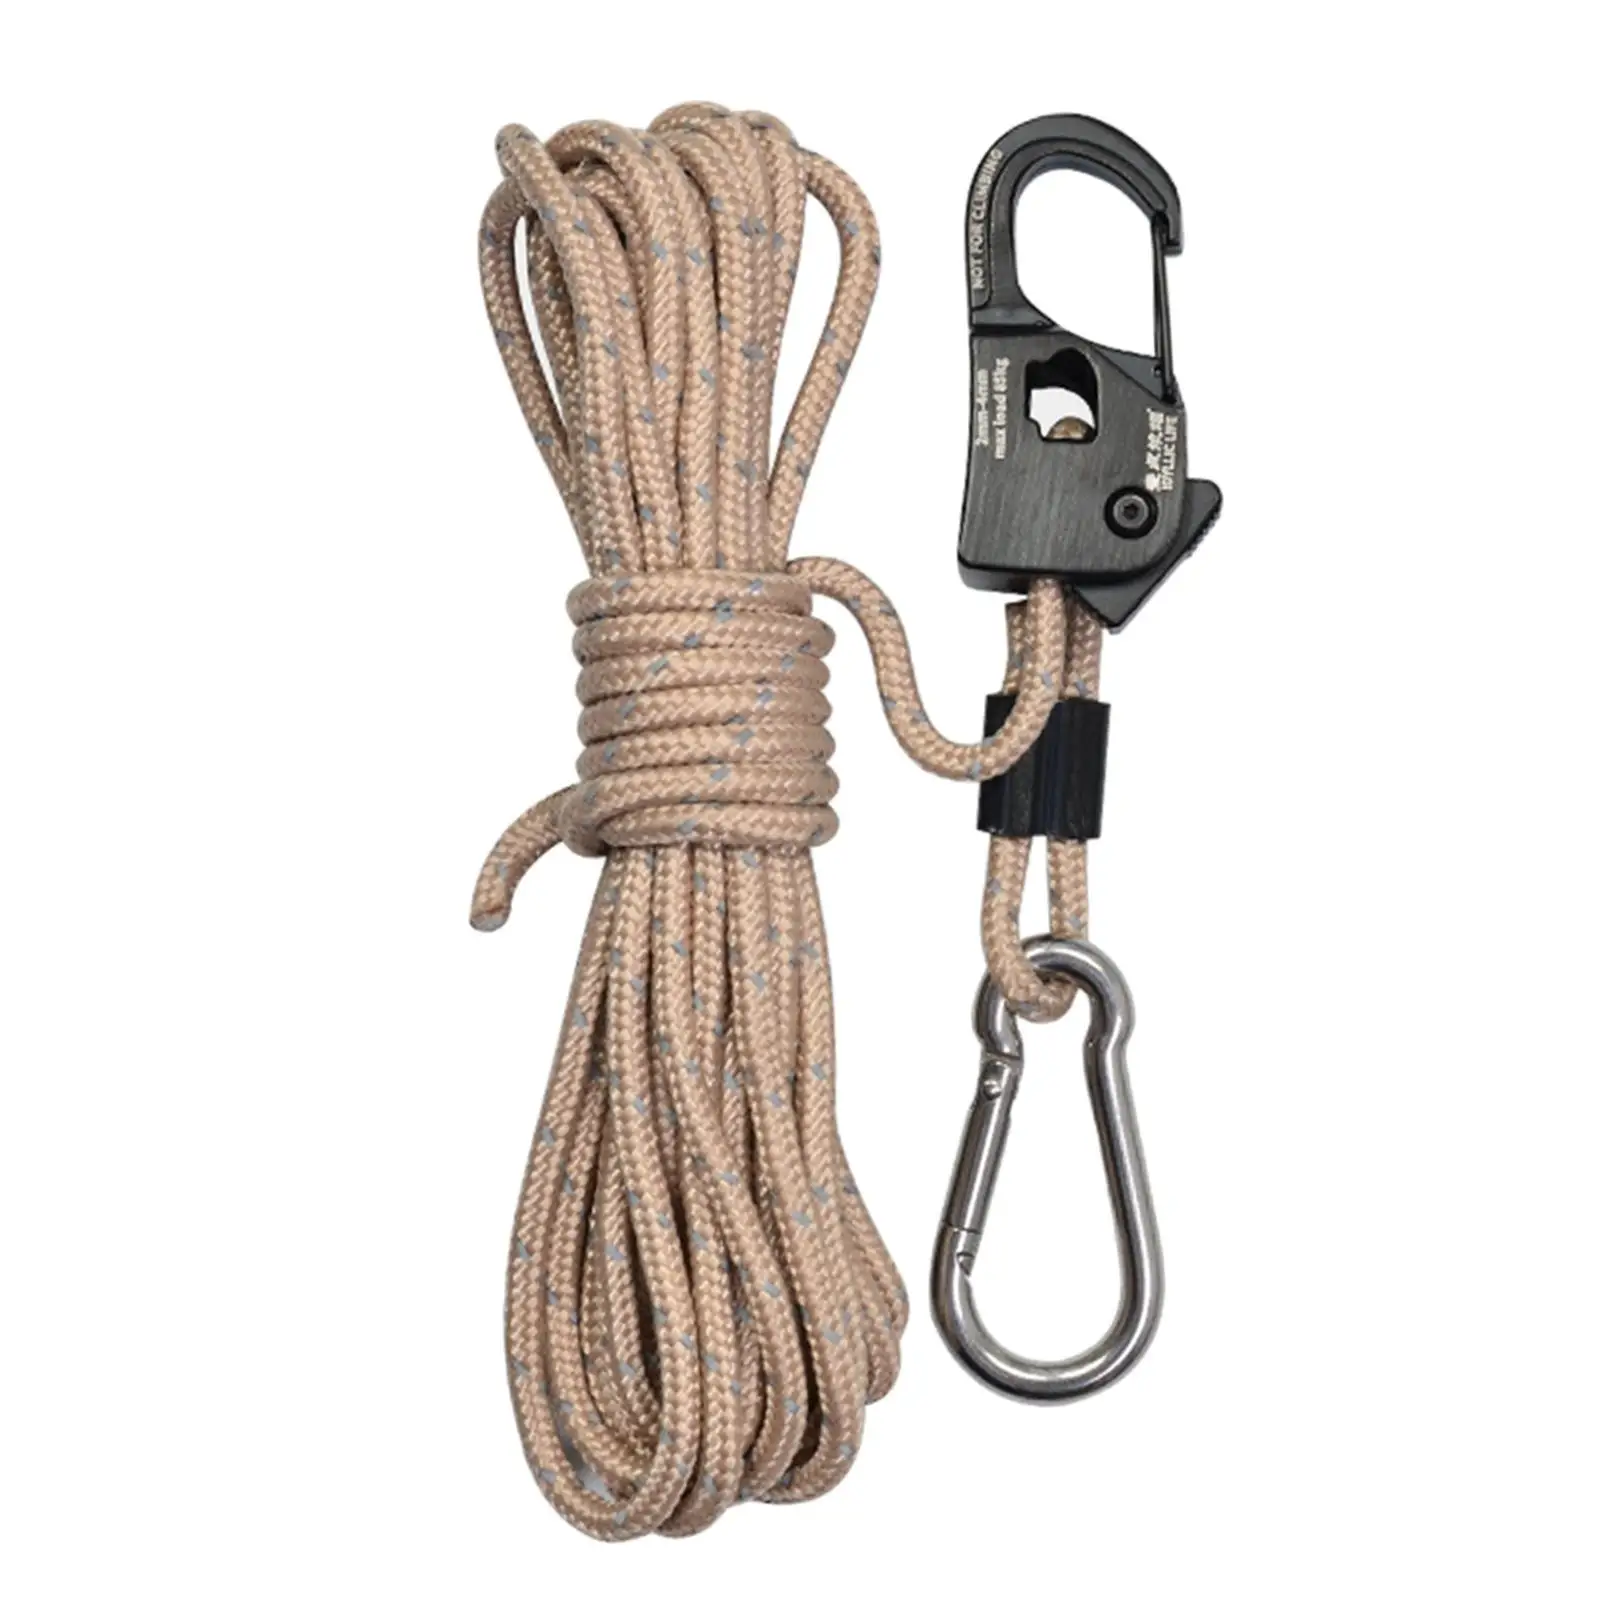 4mm Tent Guy Rope with Pulley Tent Guide Rope for Backpacking Hiking Awning